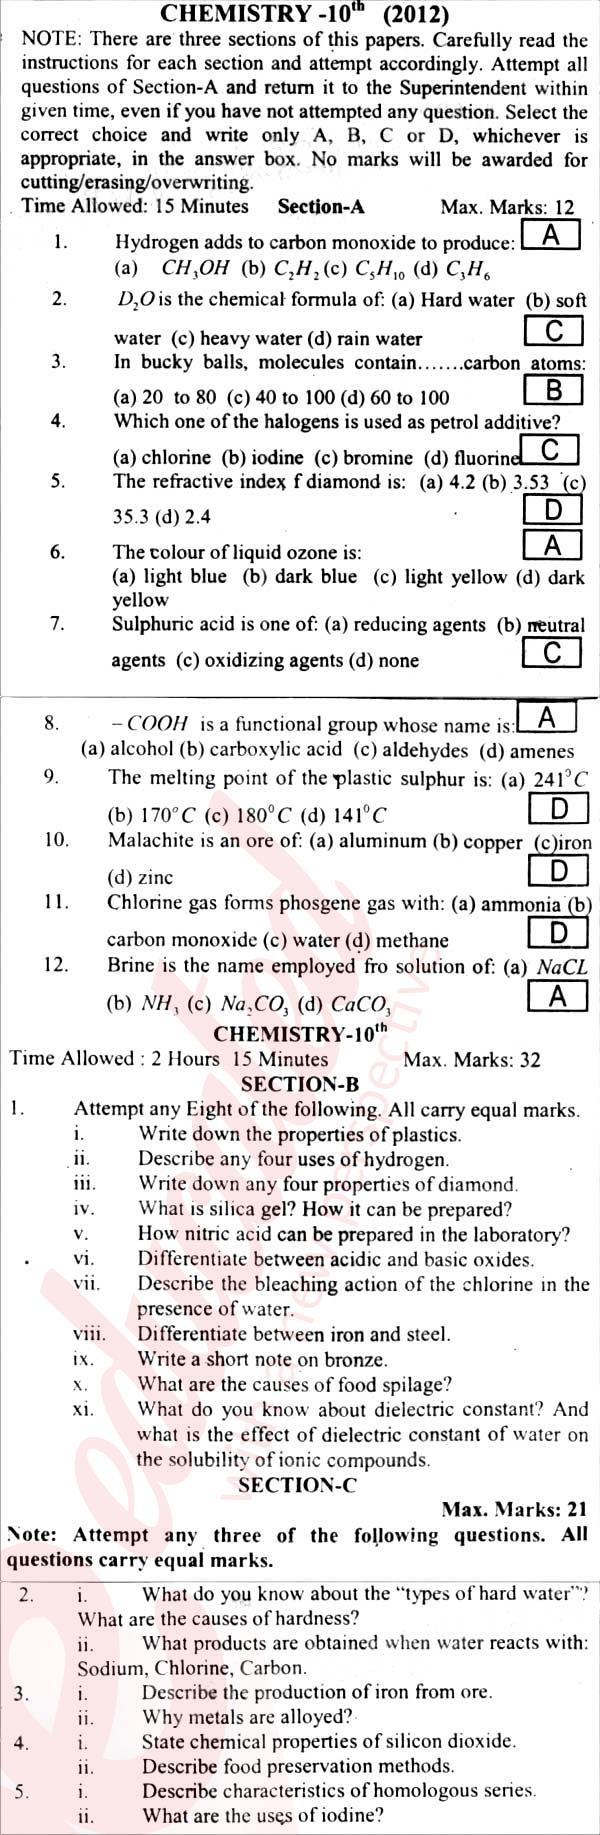 Chemistry 10th English Medium Past Paper Group 1 BISE Abbottabad 2012